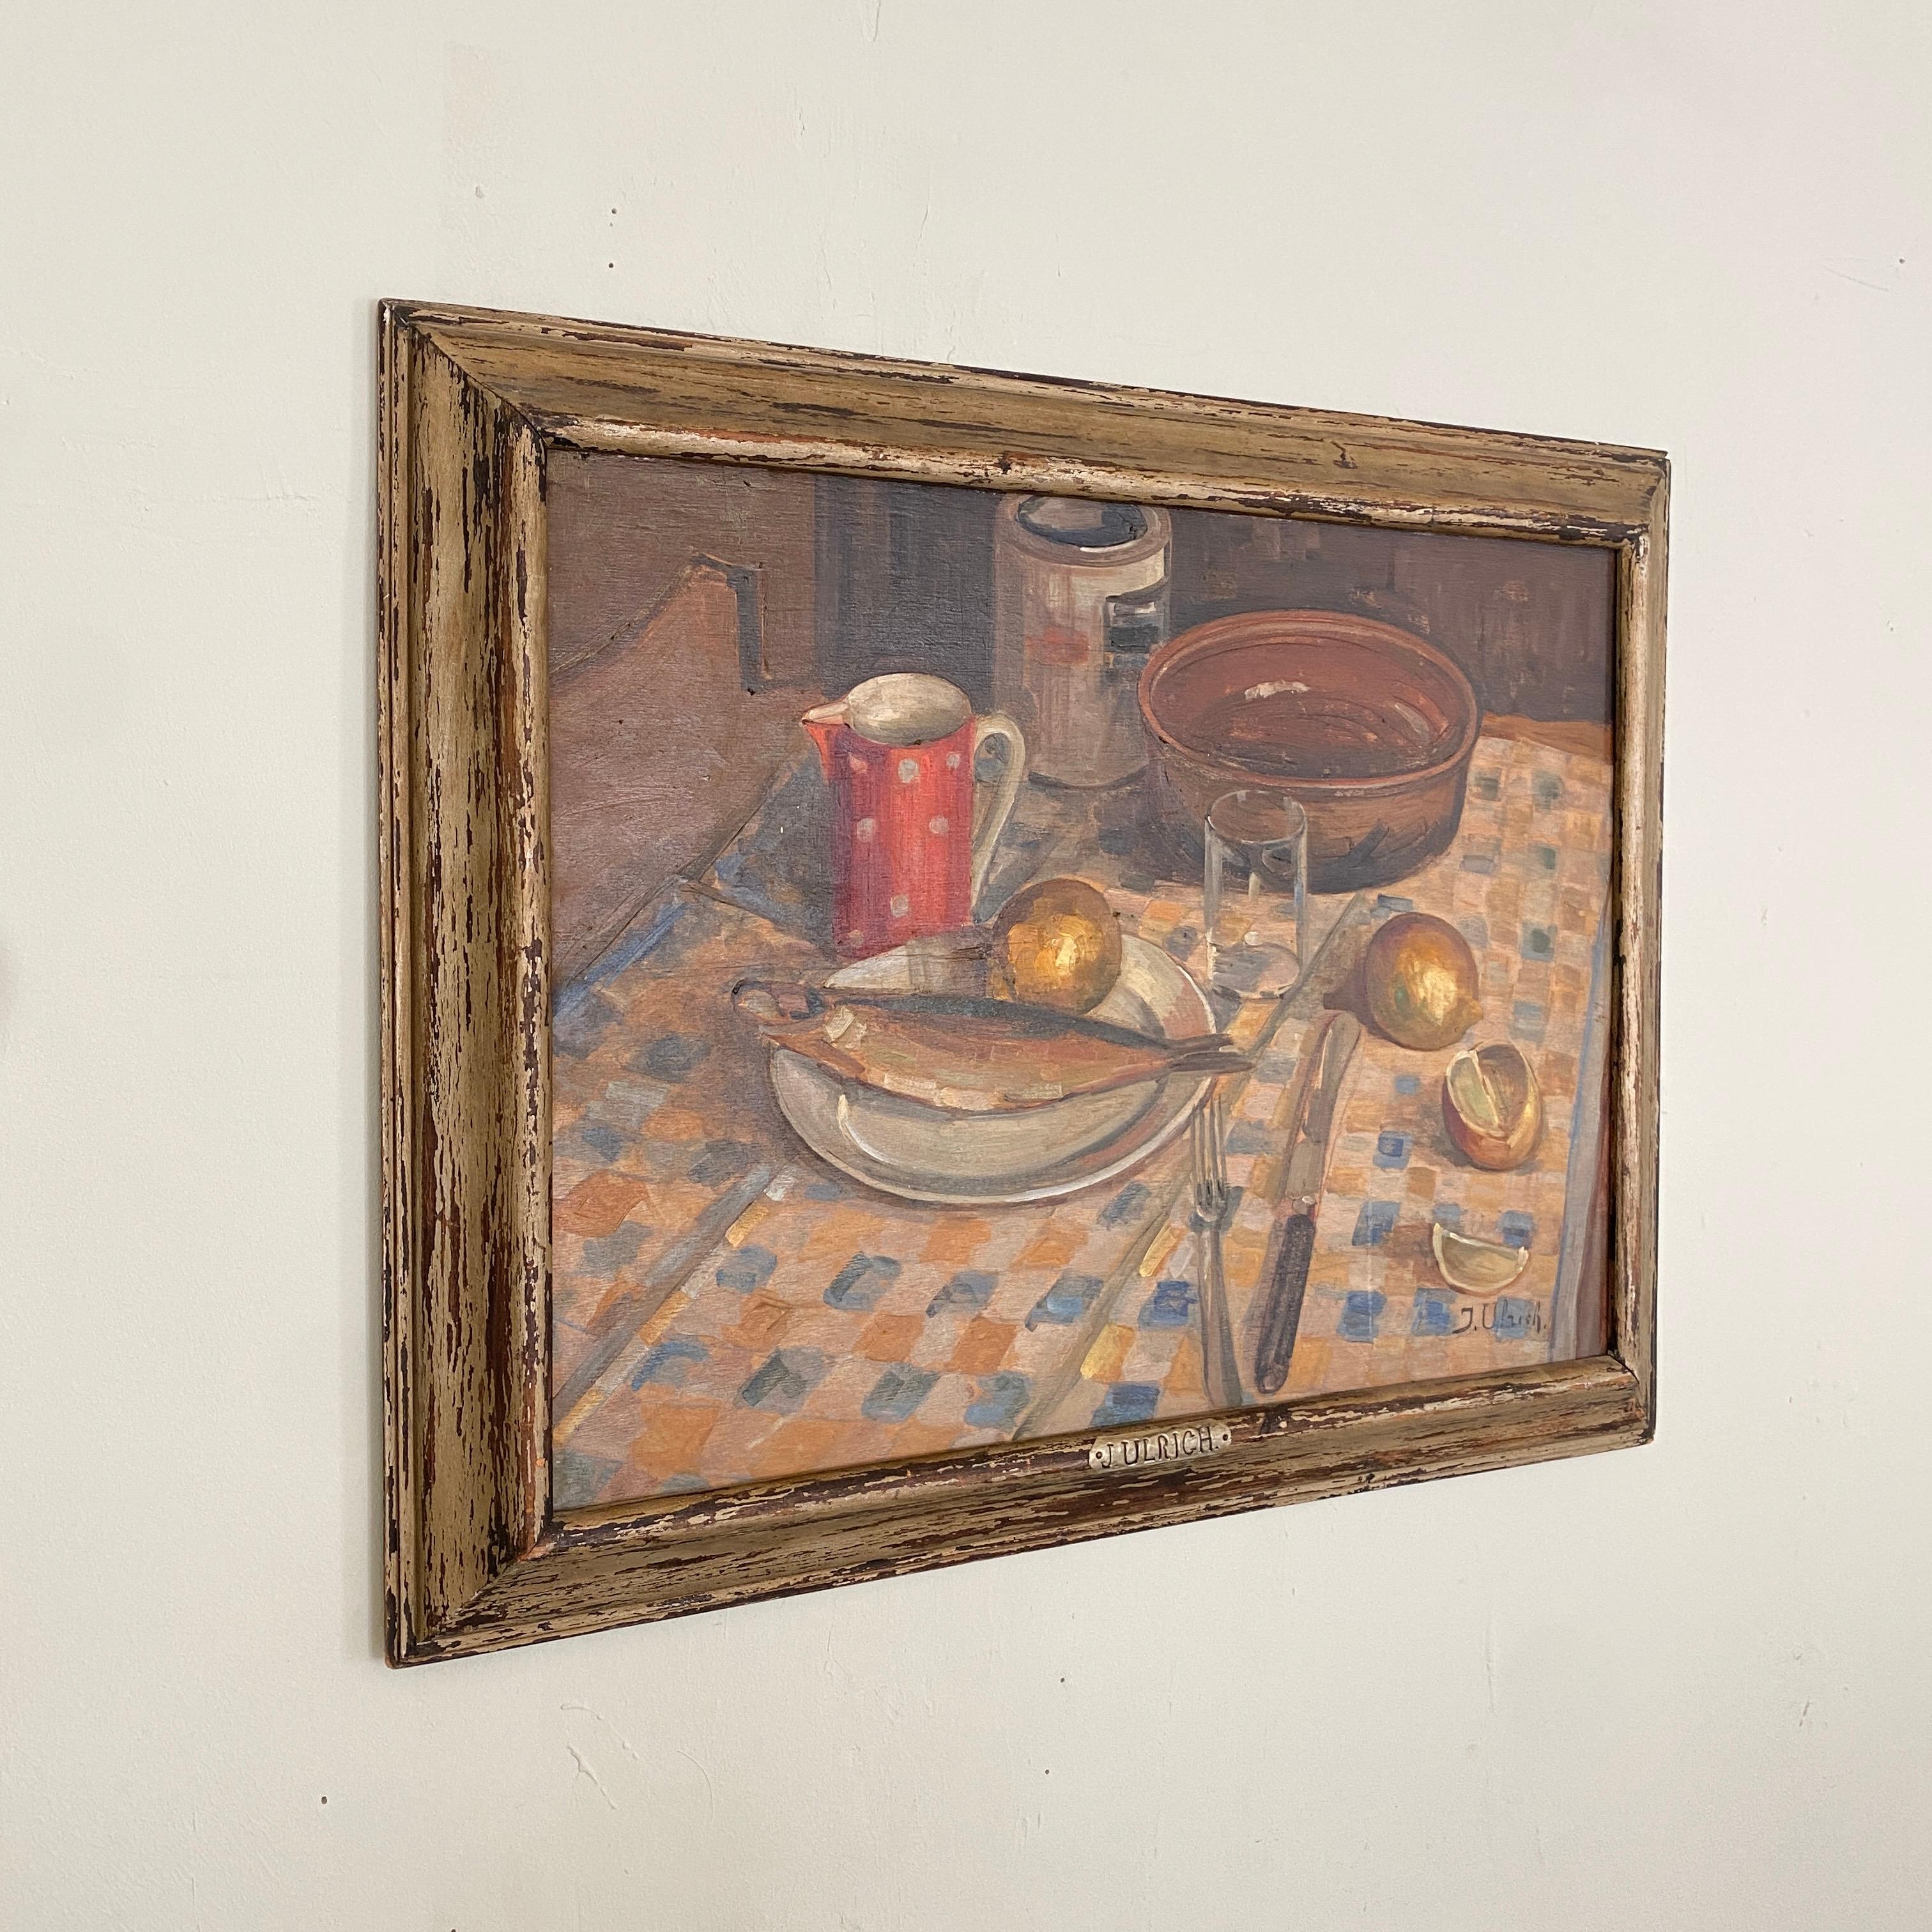 Hand-Painted Early 20th Century German Still Life Painting in the Original Frame, Around 1930